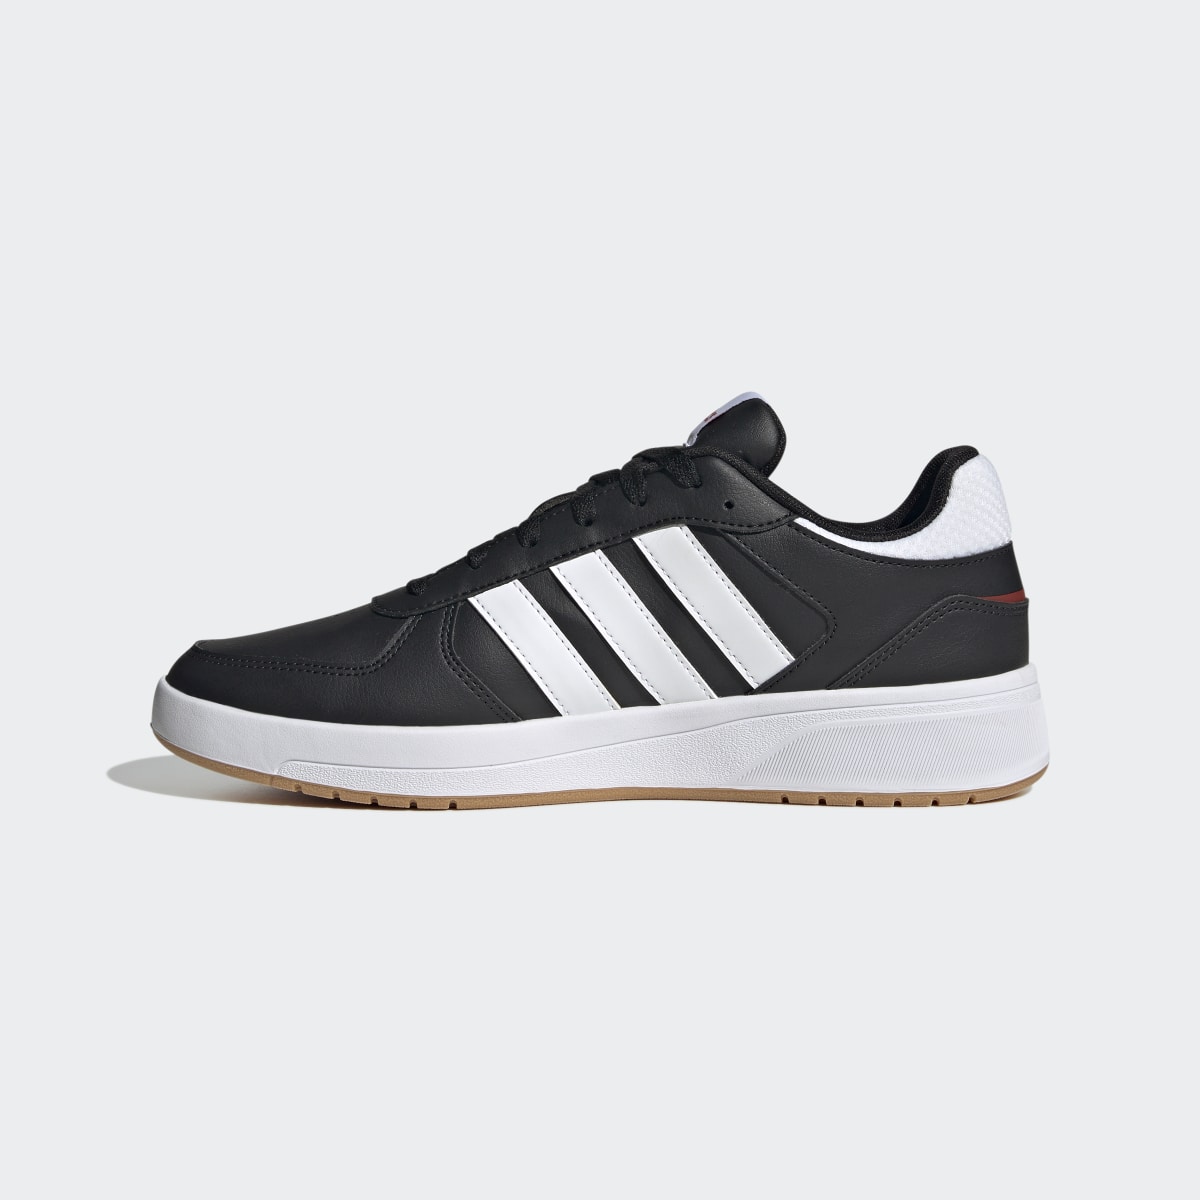 Adidas Chaussure CourtBeat Court Lifestyle. 10